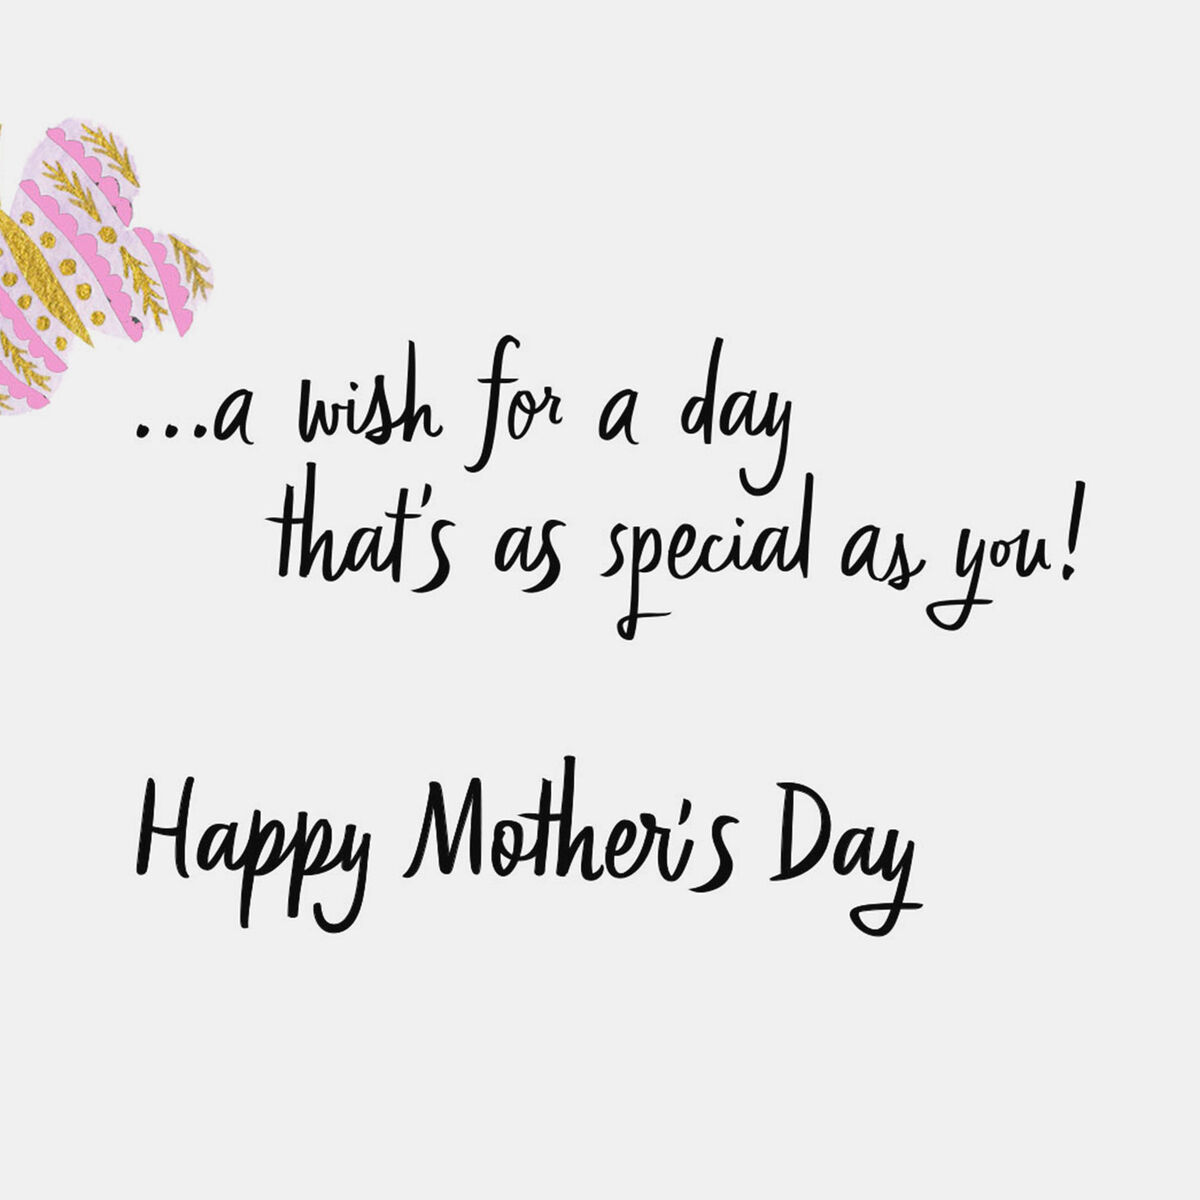 a-day-as-special-as-you-mother-s-day-card-for-sister-in-law-greeting